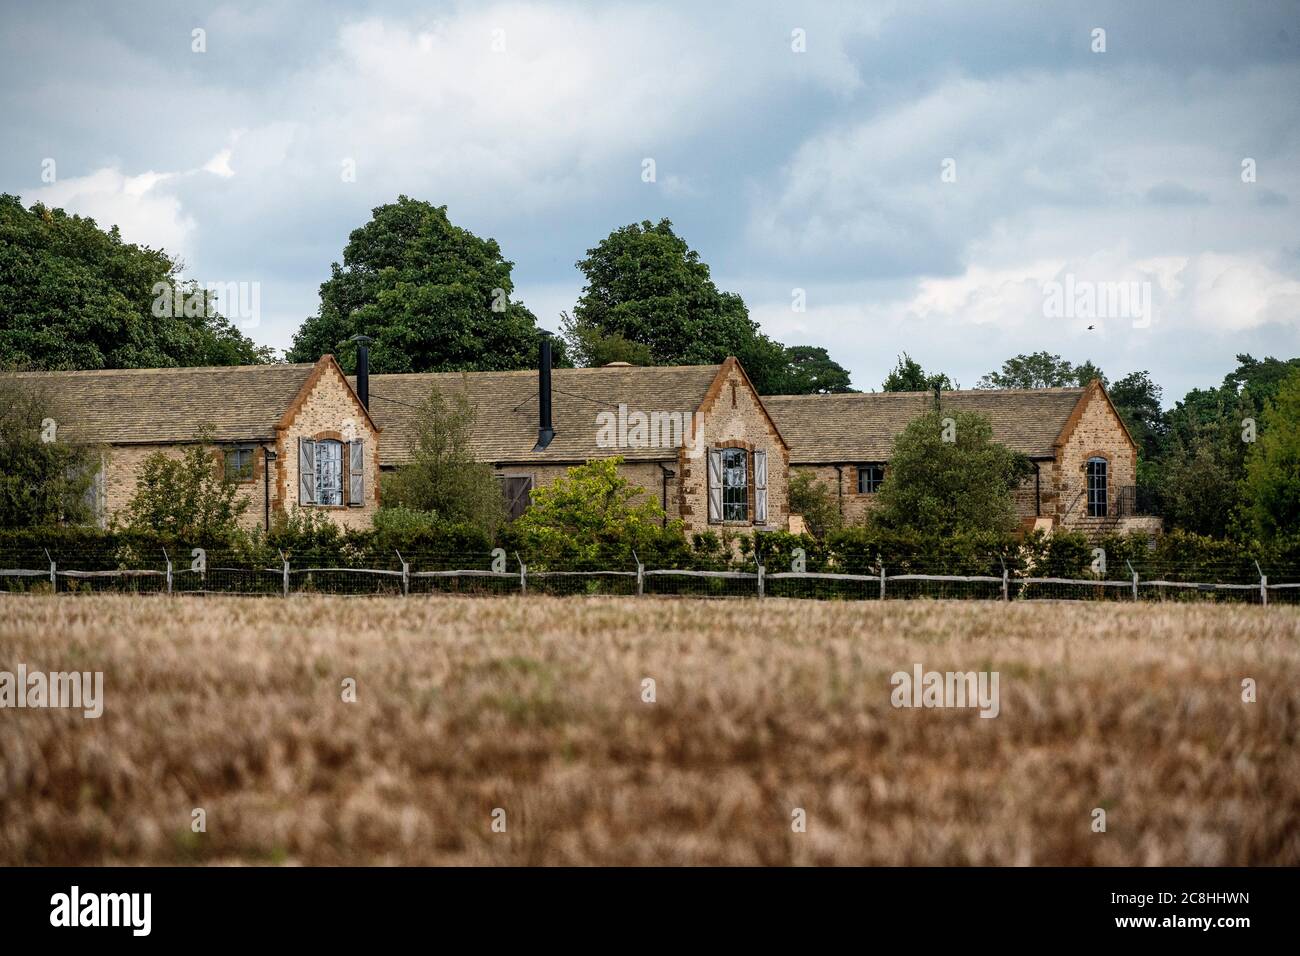 David and Victoria Beckham's Cotswolds home near Great Tew in ...